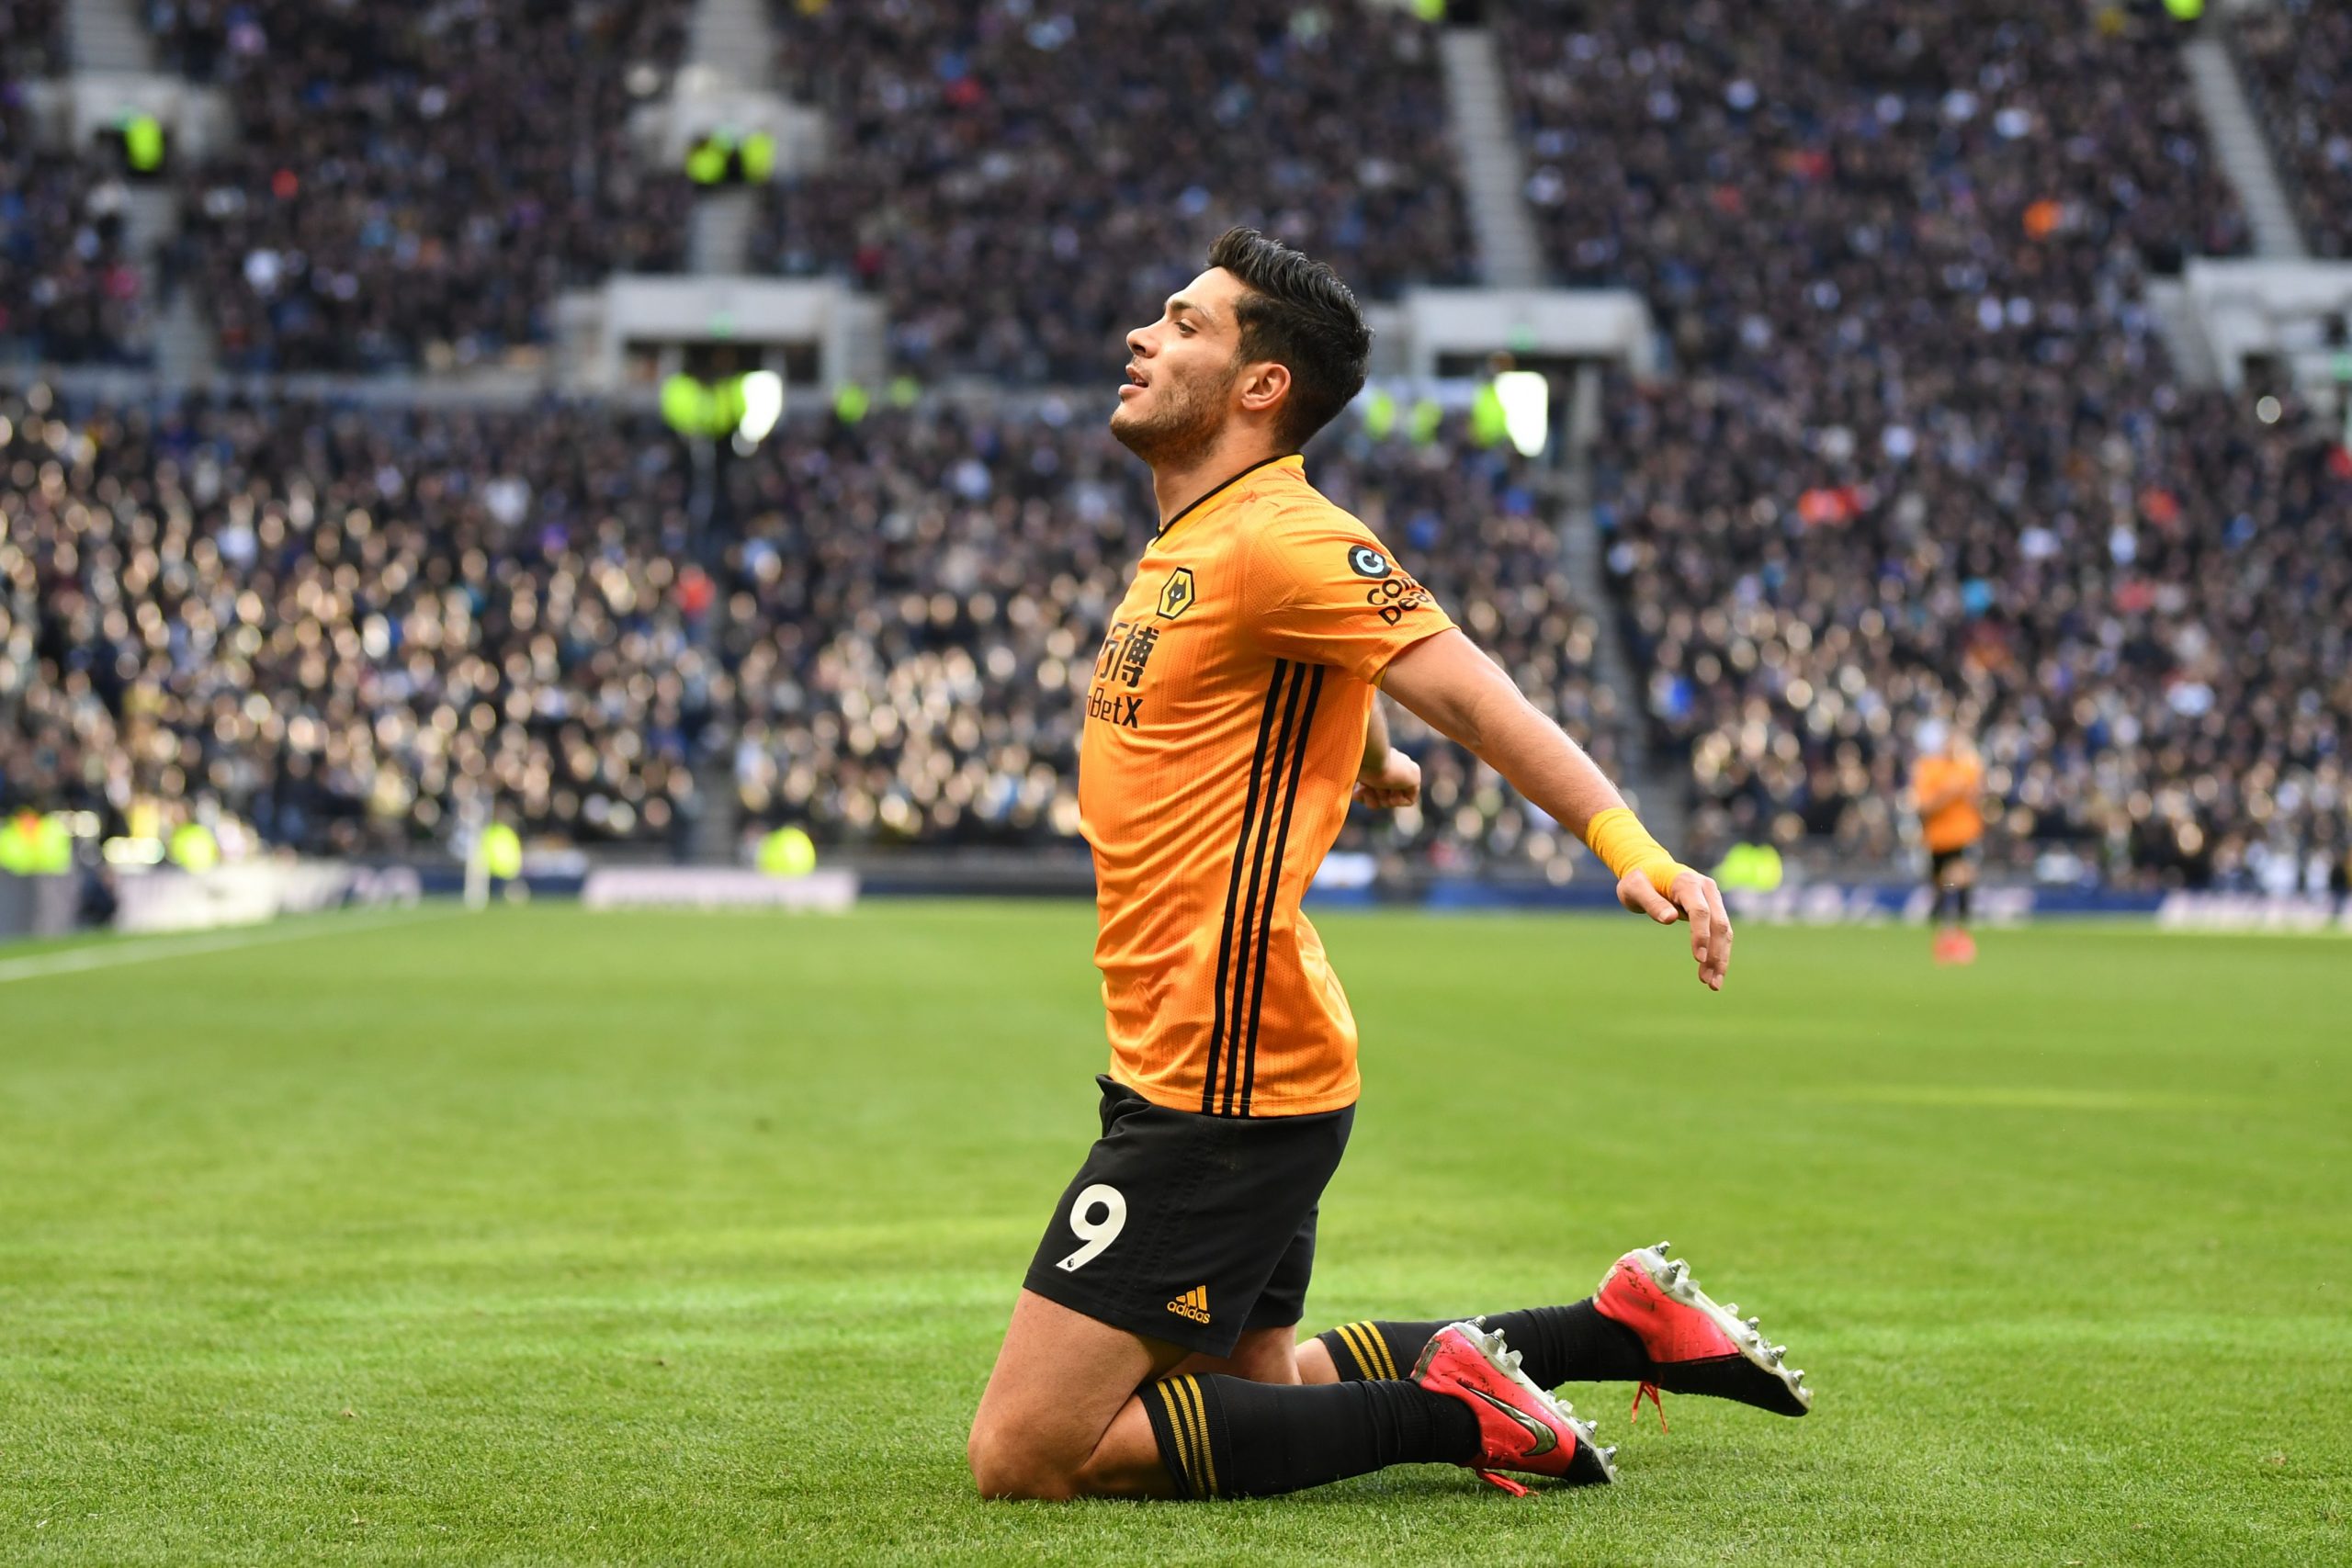 Wolverhampton Wanderers' Mexican striker Raul Jimenez celebrates after scoring their third goal during the English Premier League football match between Tottenham Hotspur and Wolverhampton Wanderers at the Tottenham Hotspur Stadium in London, on March 1, 2020. (Photo by DANIEL LEAL-OLIVAS/AFP via Getty Images)